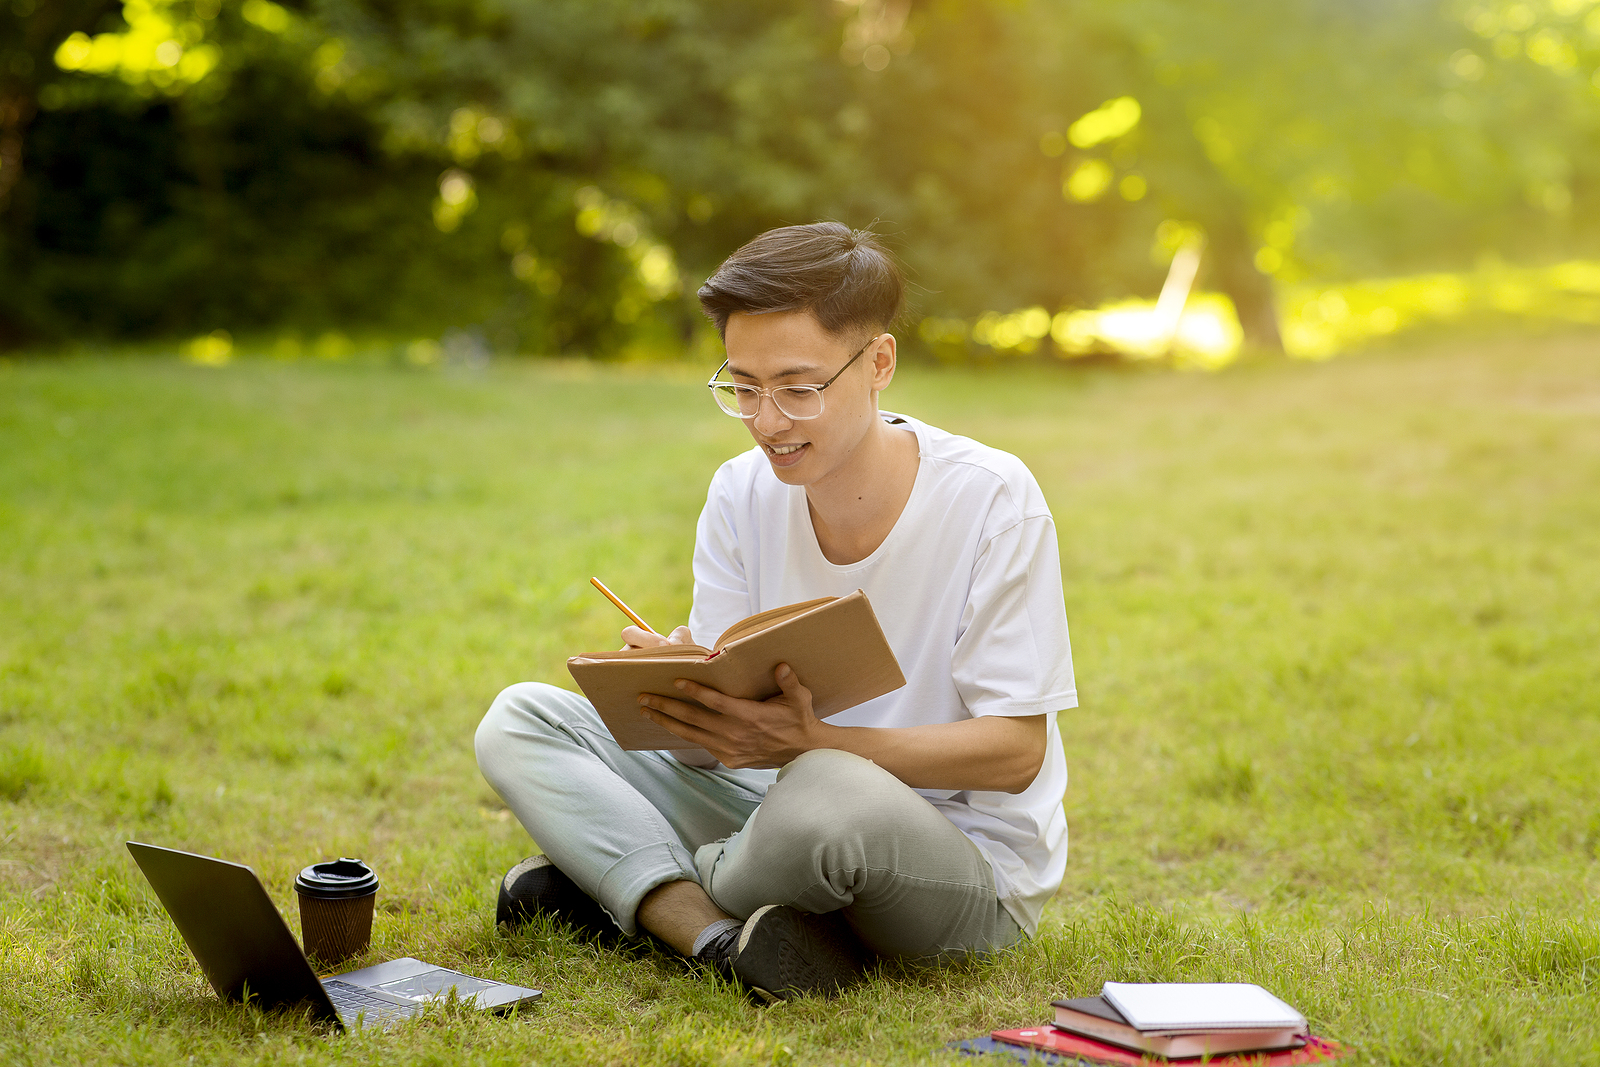 Focused Asian Student Guy Preparing For Lessons Outdoors, Reading Book And Taking Notes While Sitting On Grass In Park